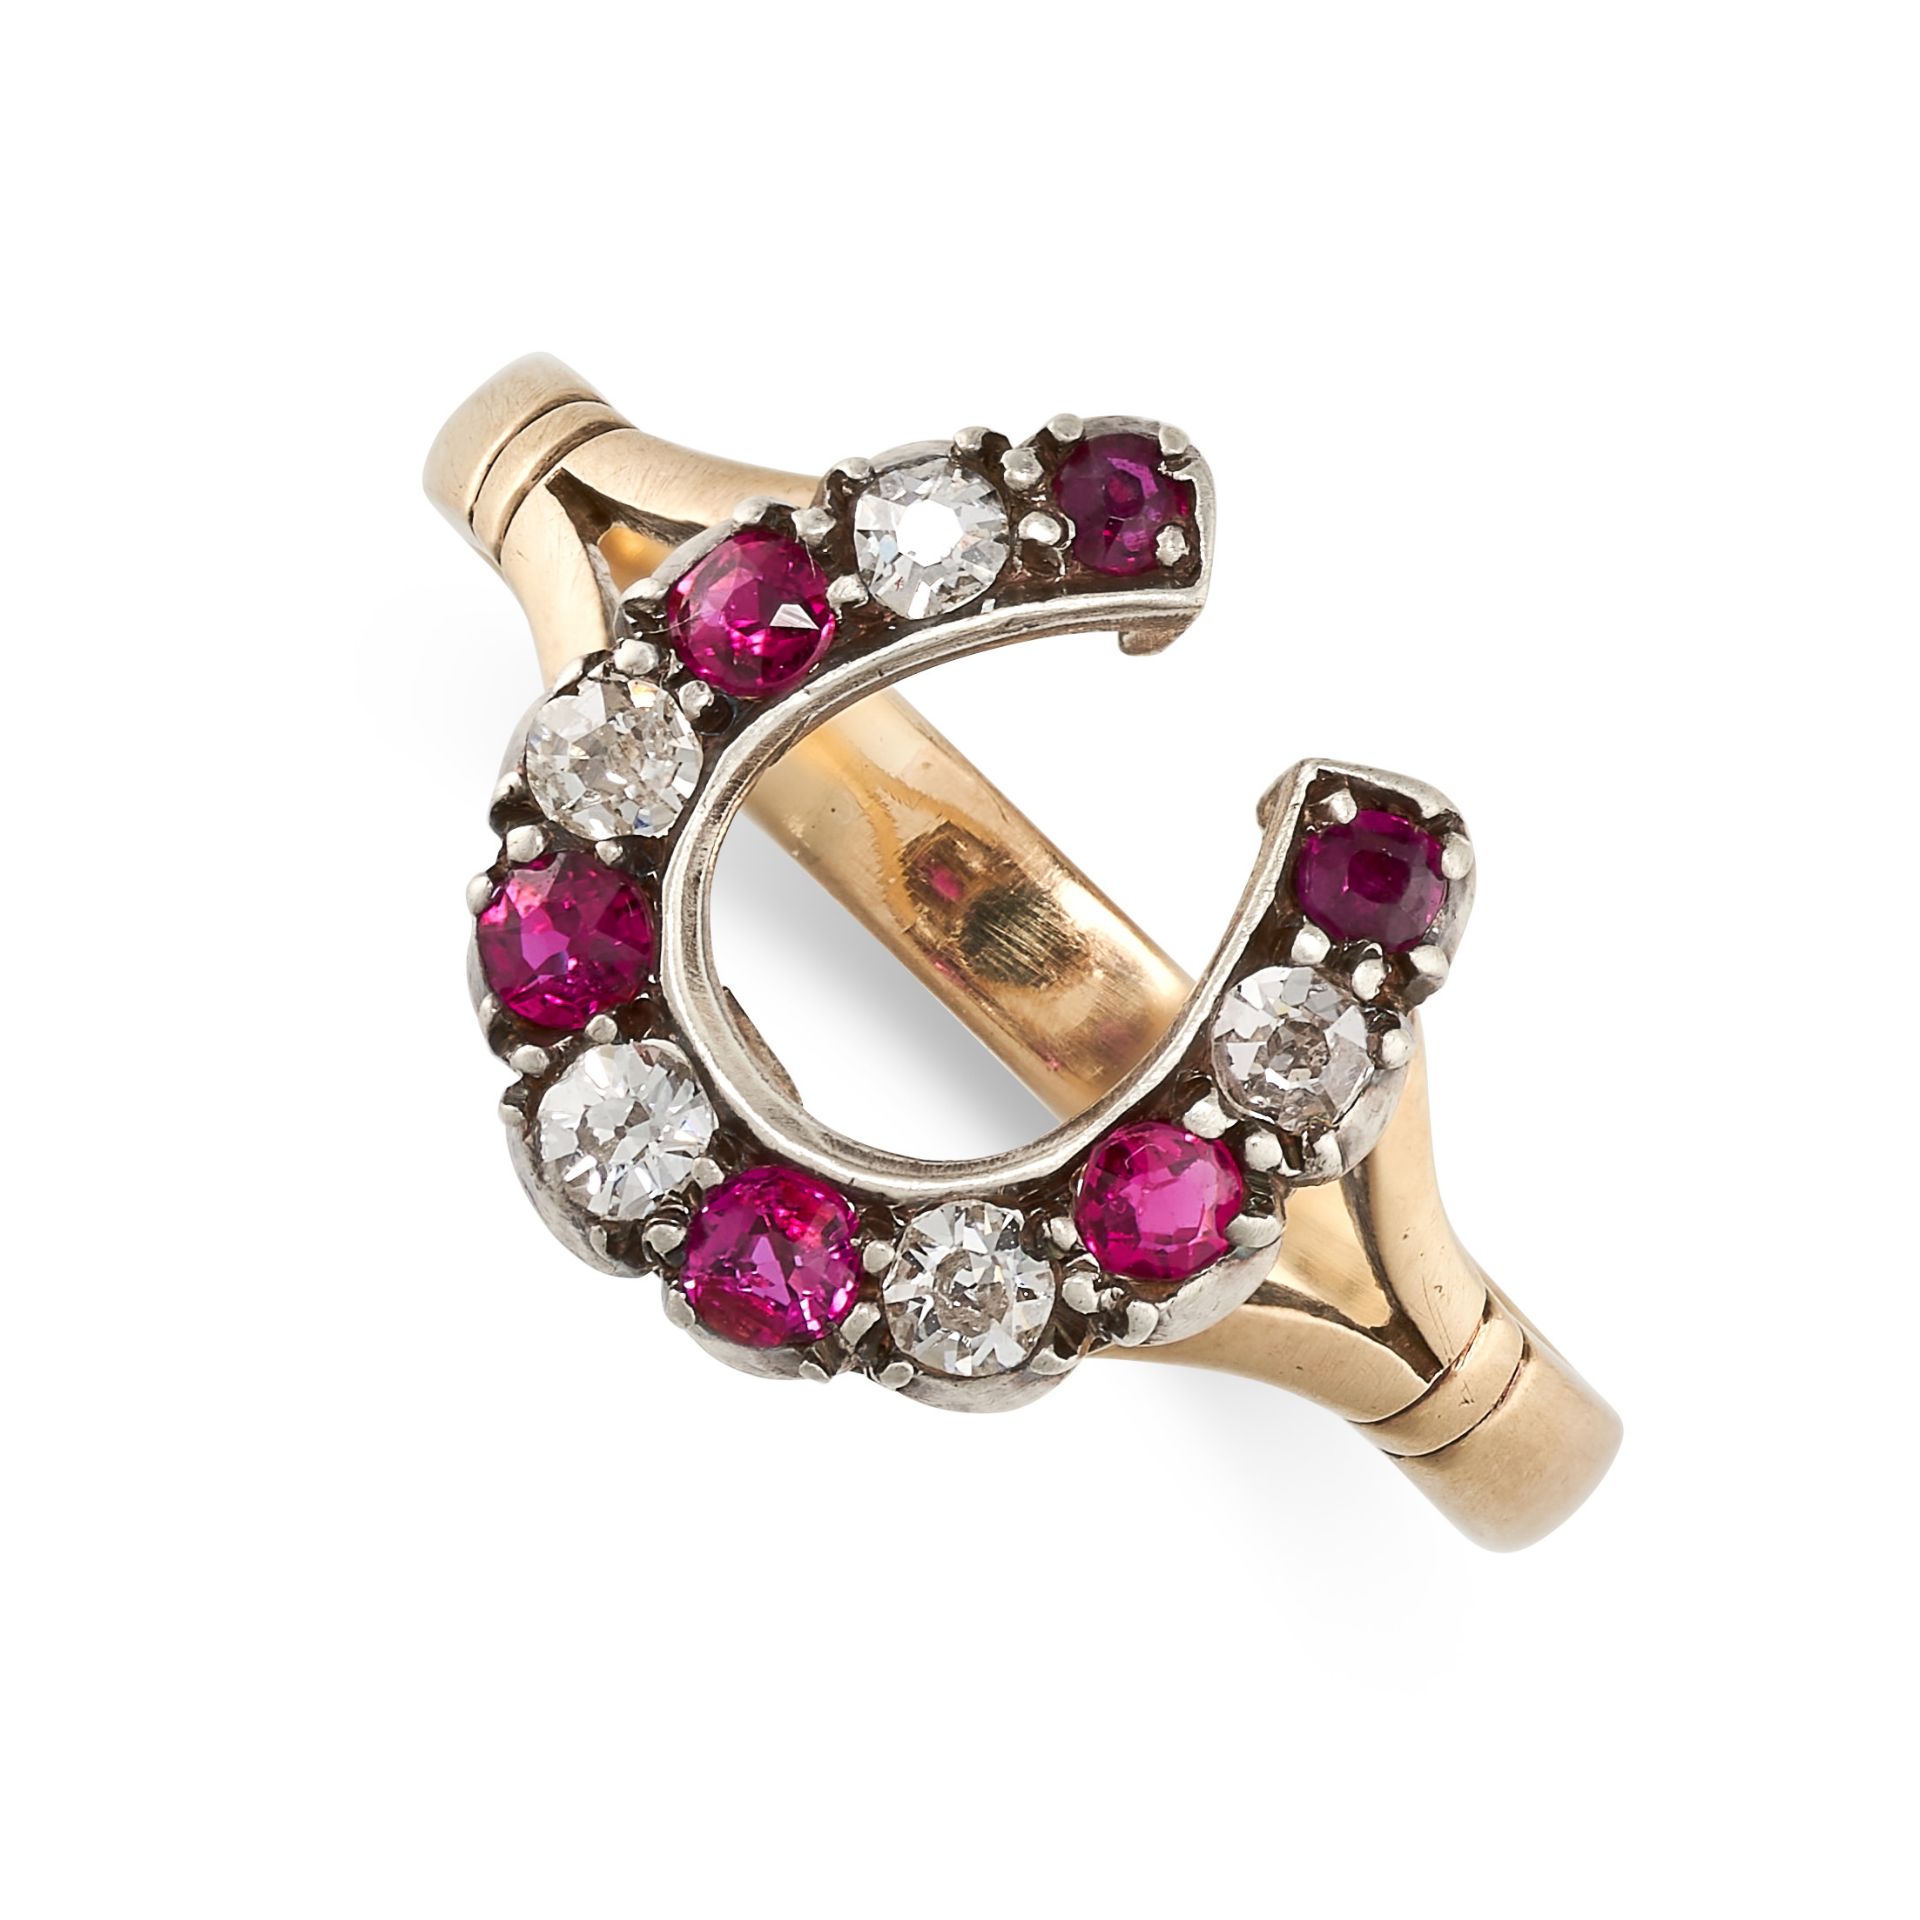 A RUBY AND DIAMOND HORSESHOE RING in yellow gold and silver, set with alternating round cut rubies